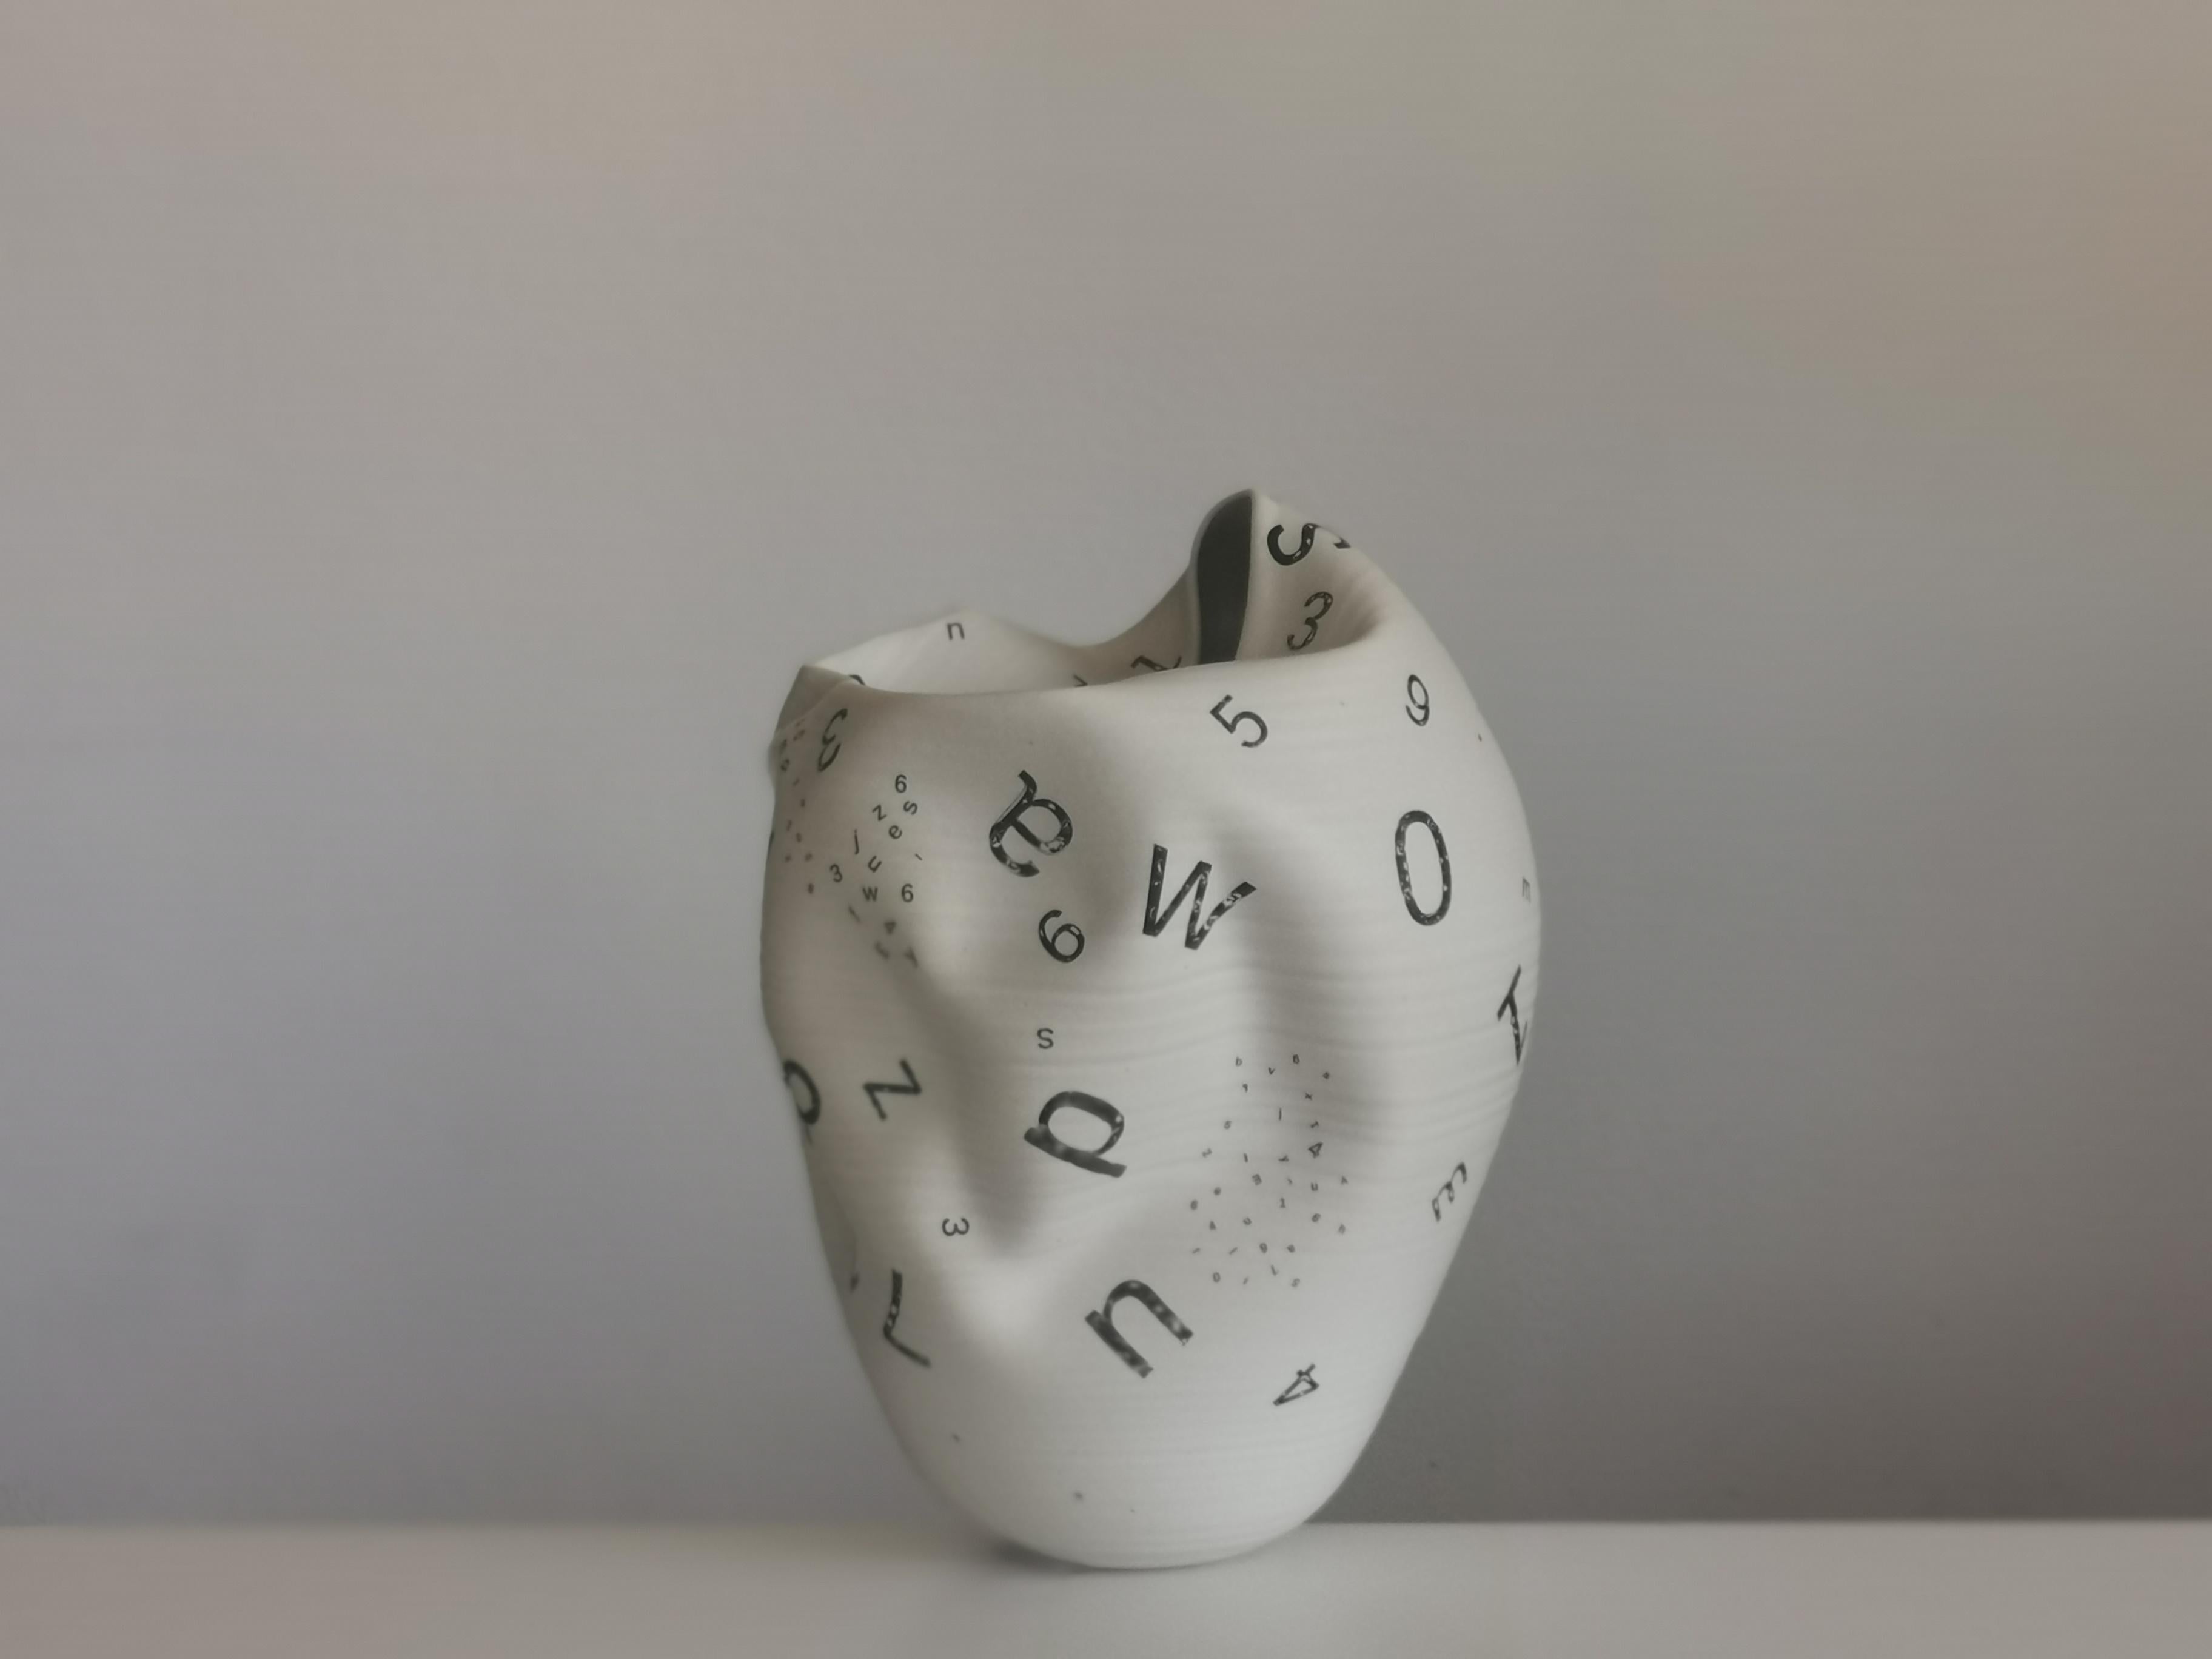 Organic Modern Distorted Form Letters and Numbers N.82, White Clay Ceramic Sculpture, Vessel For Sale